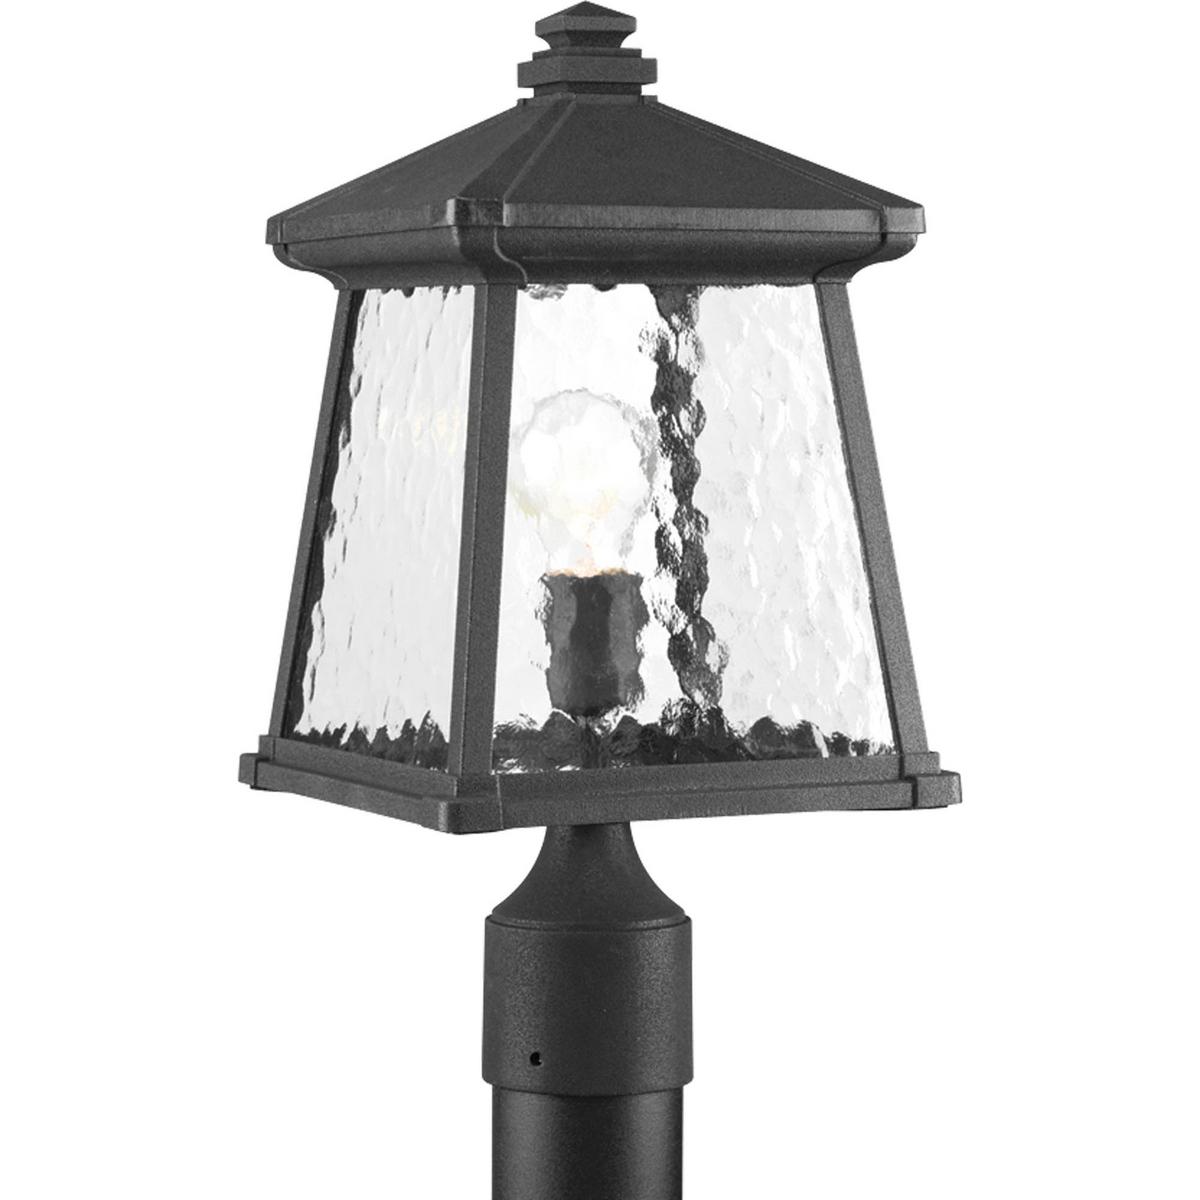 Hubbell P5459-31 Classic arts and crafts inspired profile. Cast aluminum construction with clear water glass and decorative bottom detail. Textured black powder coated finish. One-light post lantern fits standard 3" posts.  ; Classic arts and crafts inspired profile. ; Ca